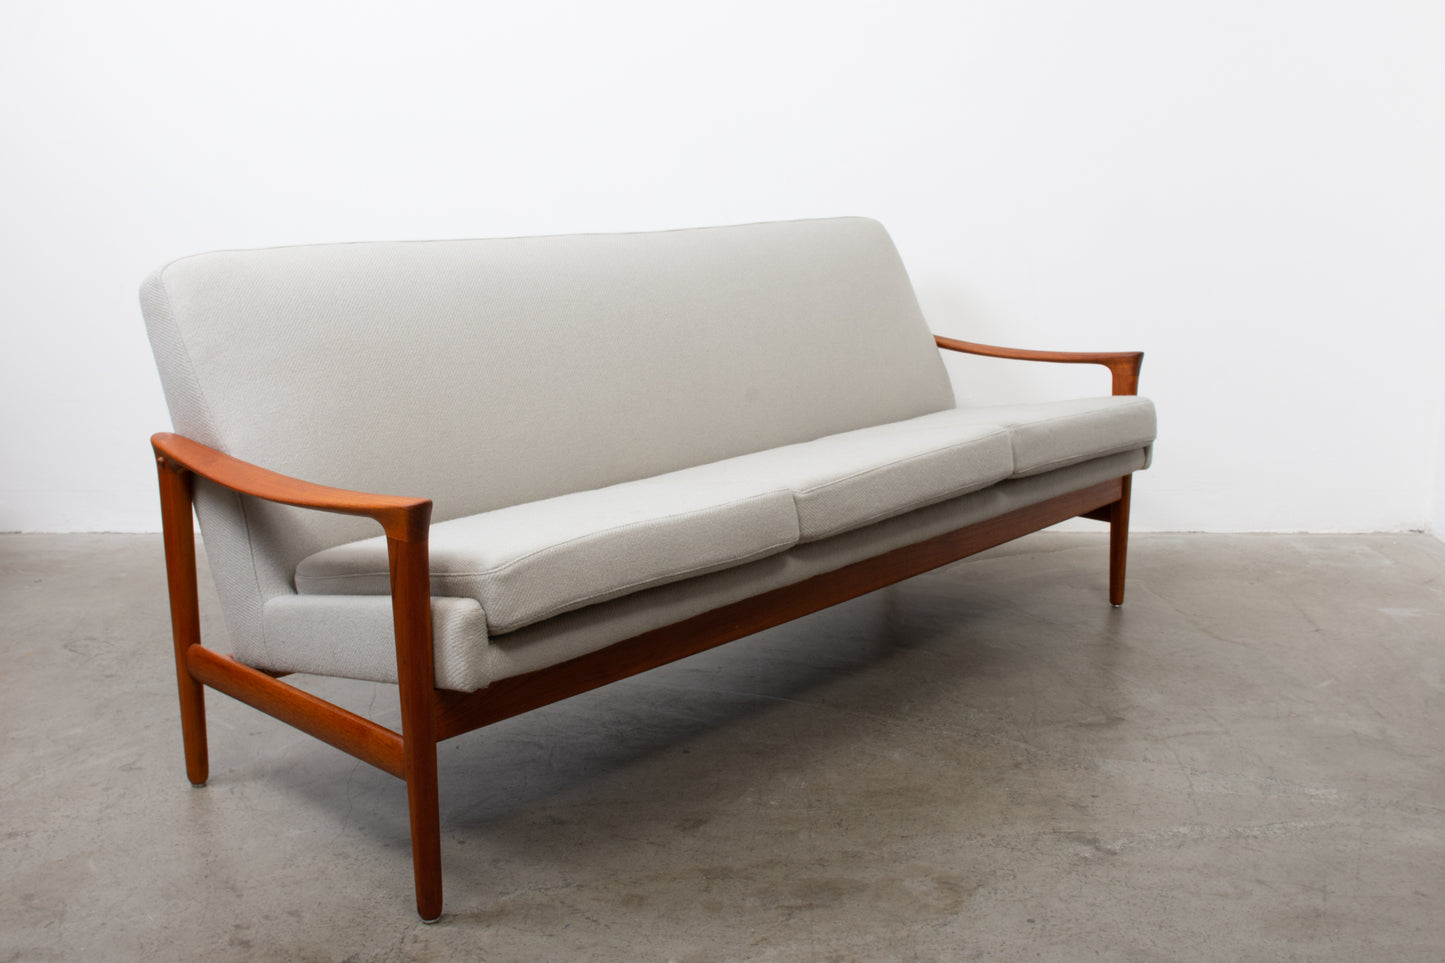 Newly reupholstered: 1960s 'Oslo' sofa by Inge Andersson